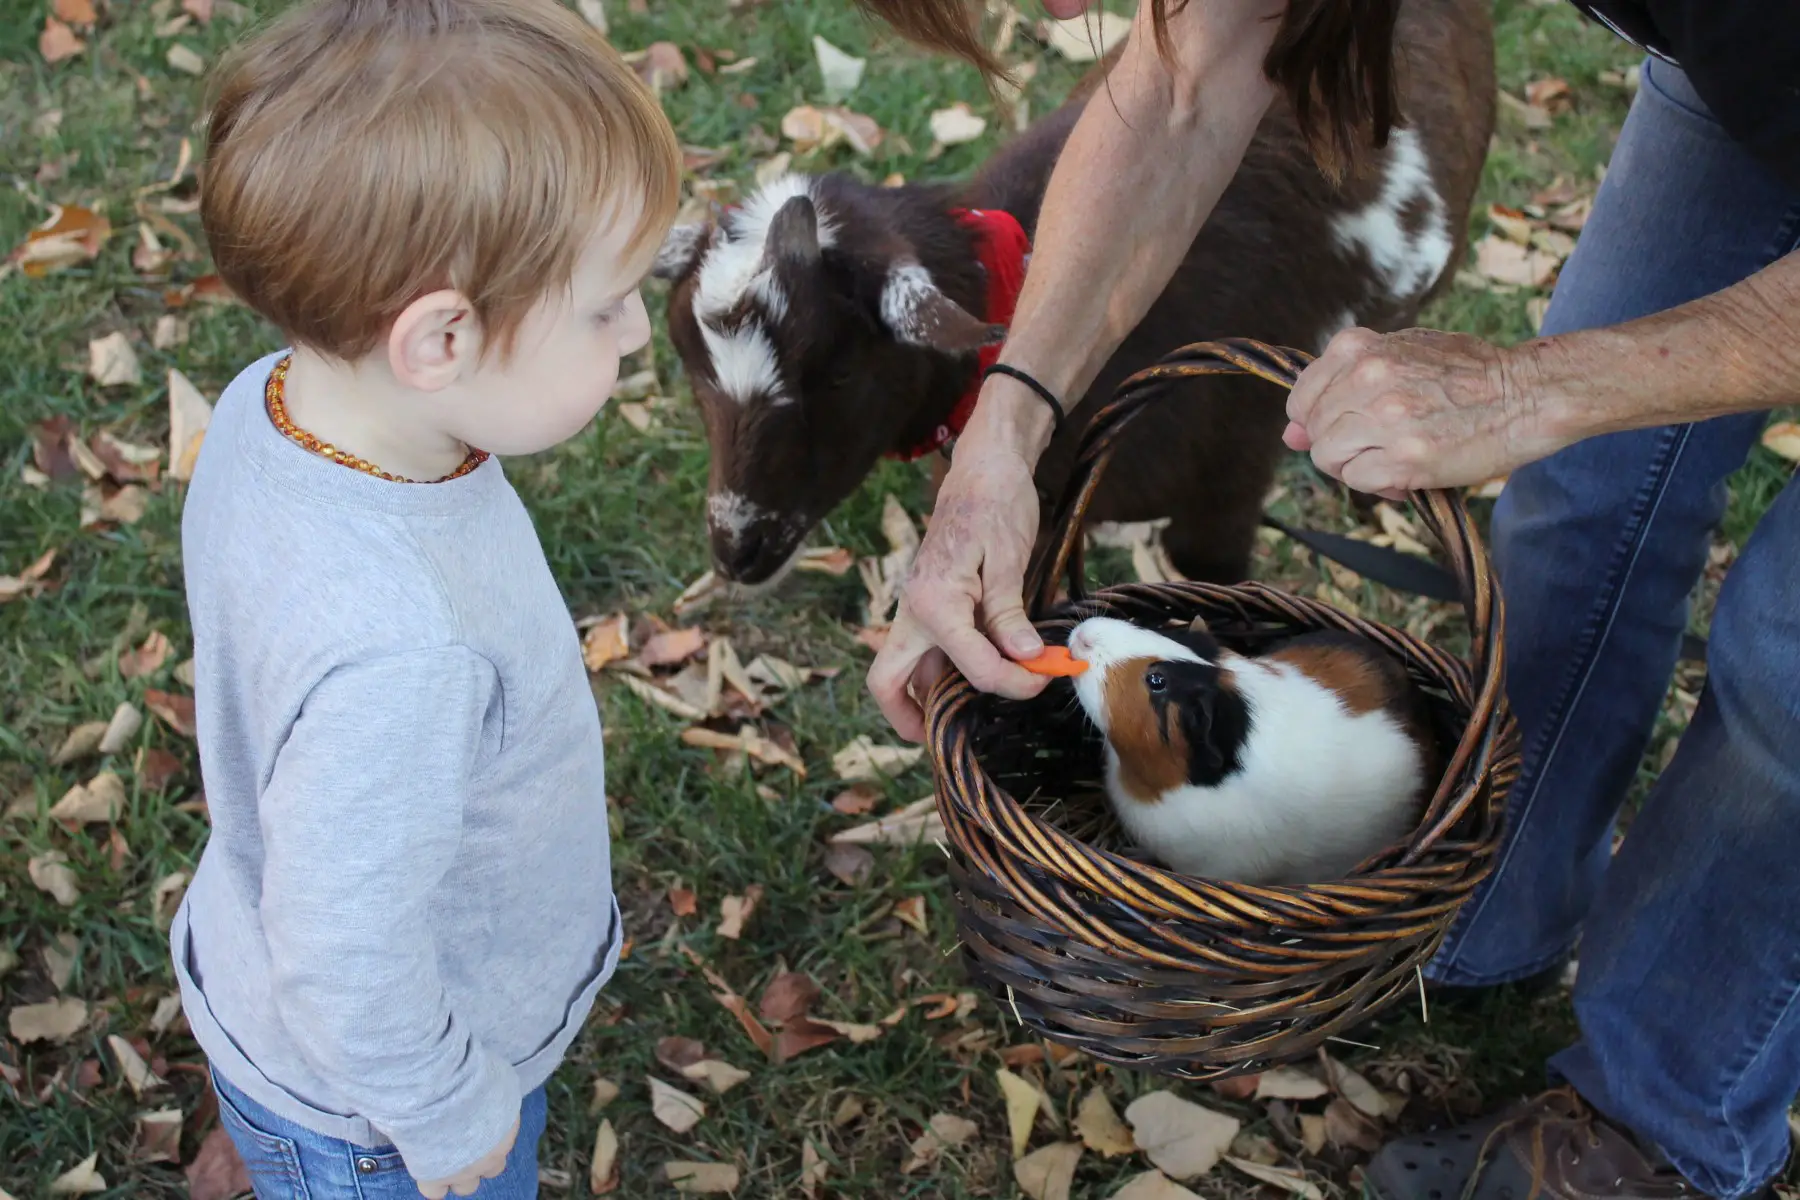 Boy looking at a guinea pig in a basket, with a small goat is standing near by. The basket is held by an adult who is also feeding the guinea pig a slice of carrot.